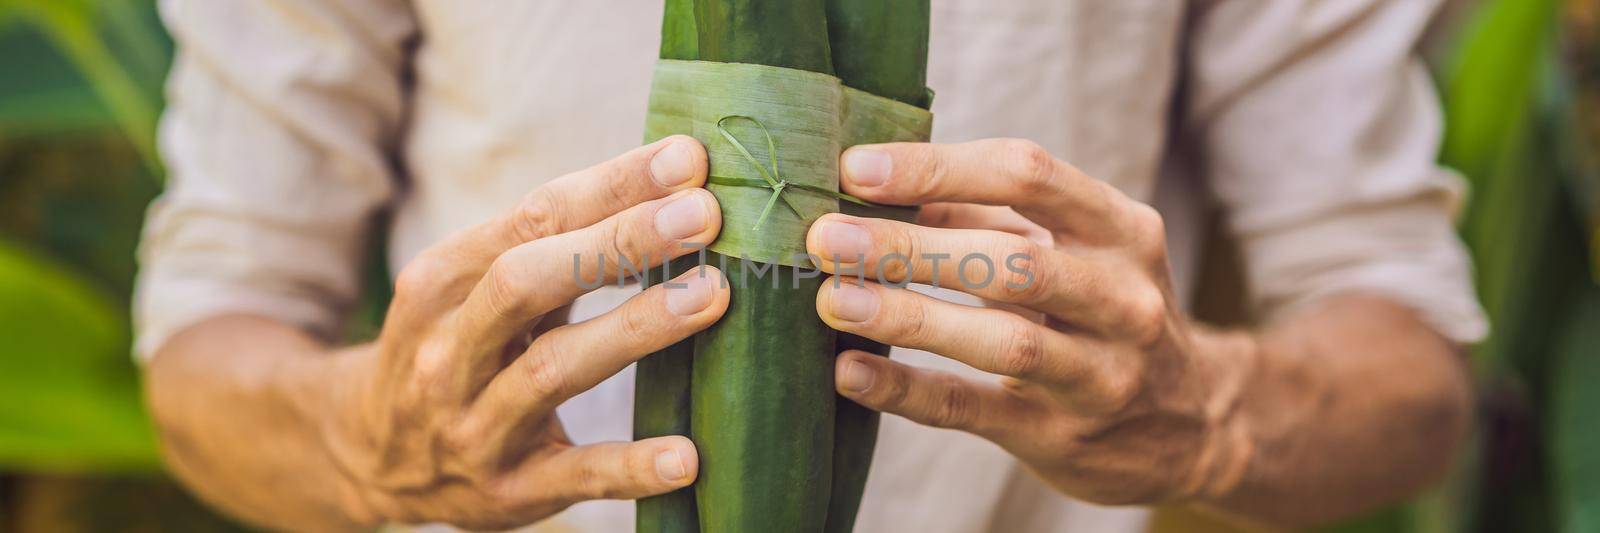 BANNER, LONG FORMAT Eco-friendly product packaging concept. Cucumber wrapped in a banana leaf, as an alternative to a plastic bag. Zero waste concept. Alternative packaging by galitskaya